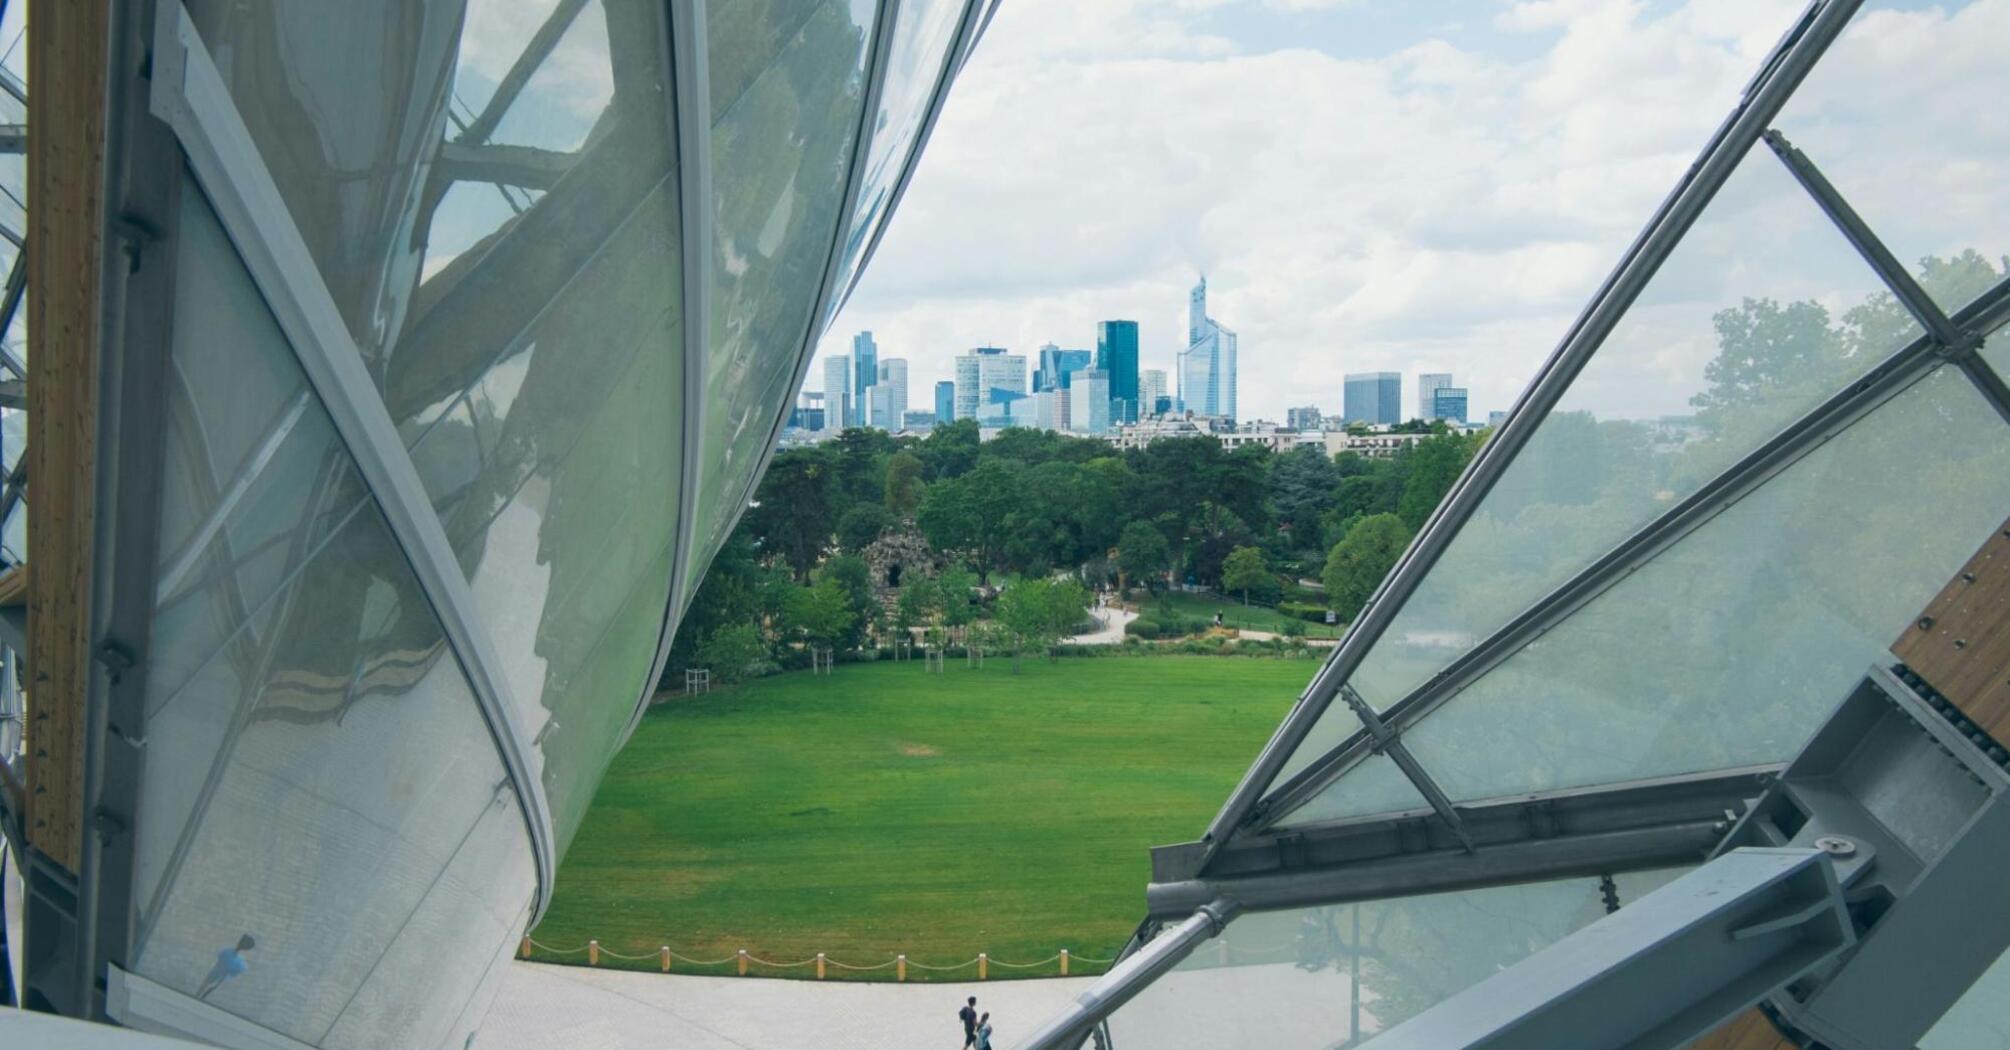 The view from the building of Louis Vuitton Fondation in Paris